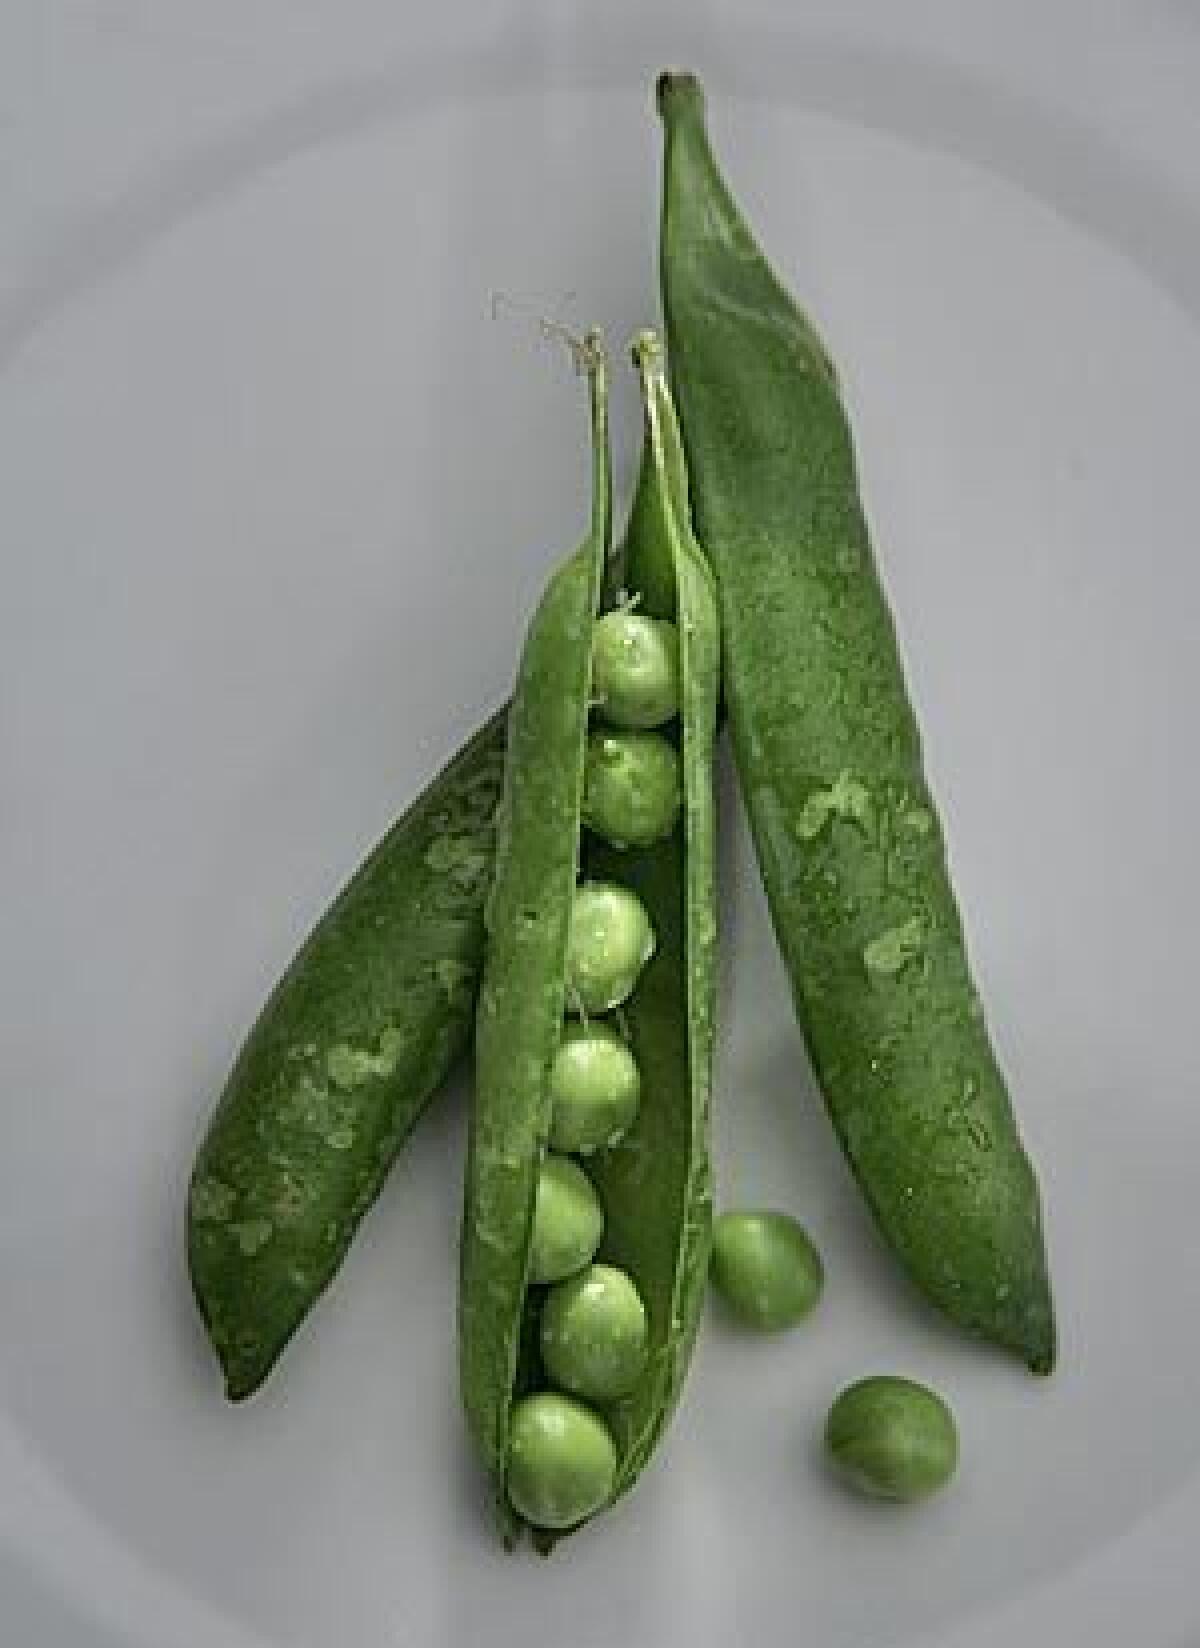 For a quick fix, simmer the peas in their pods in a skillet with about 1 inch of water and a nice chunk of butter.